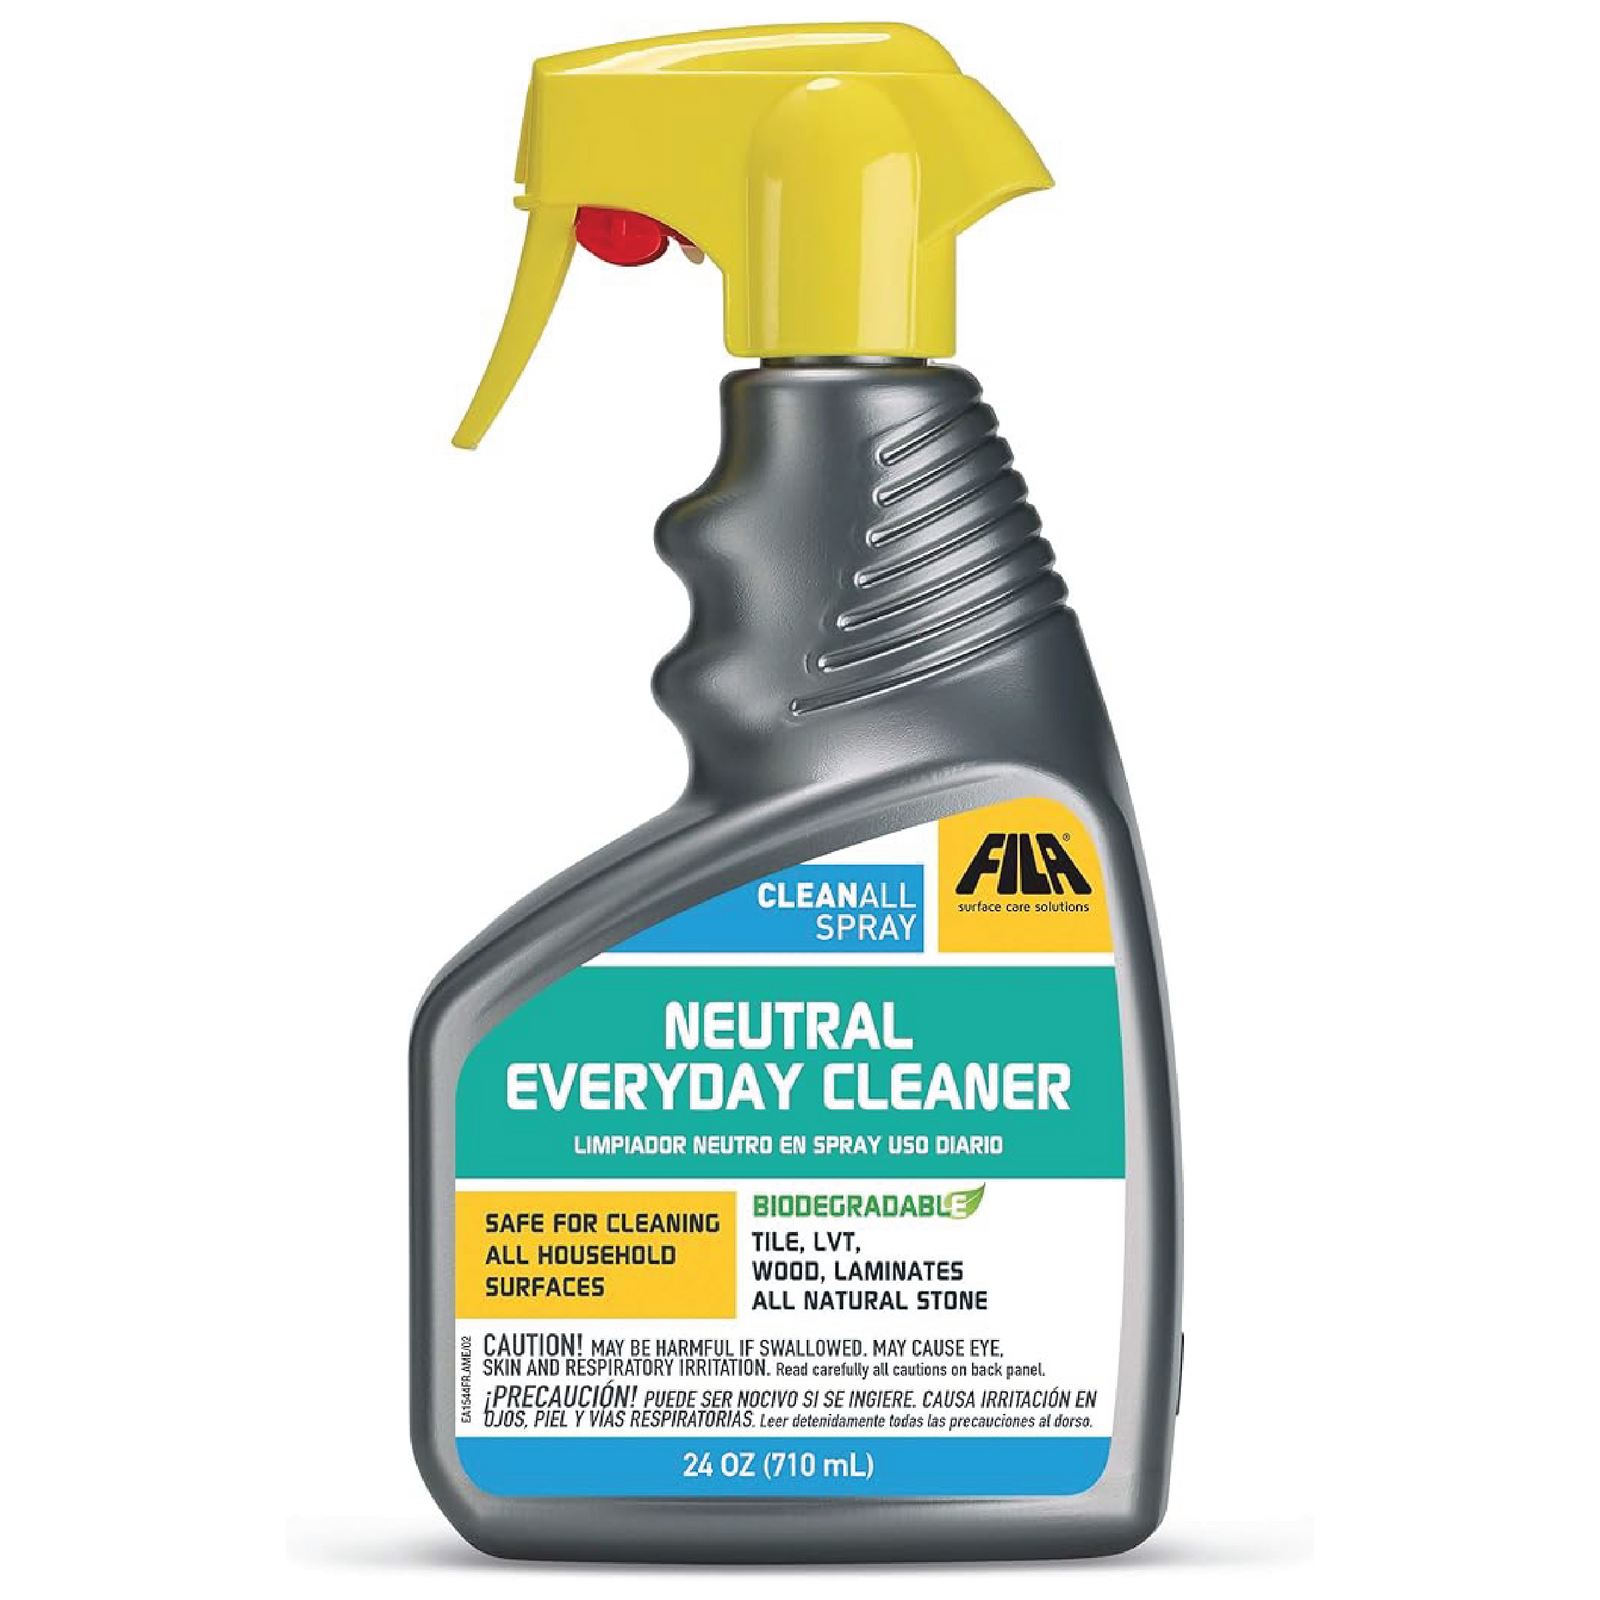 Neutral Everyday Cleaner